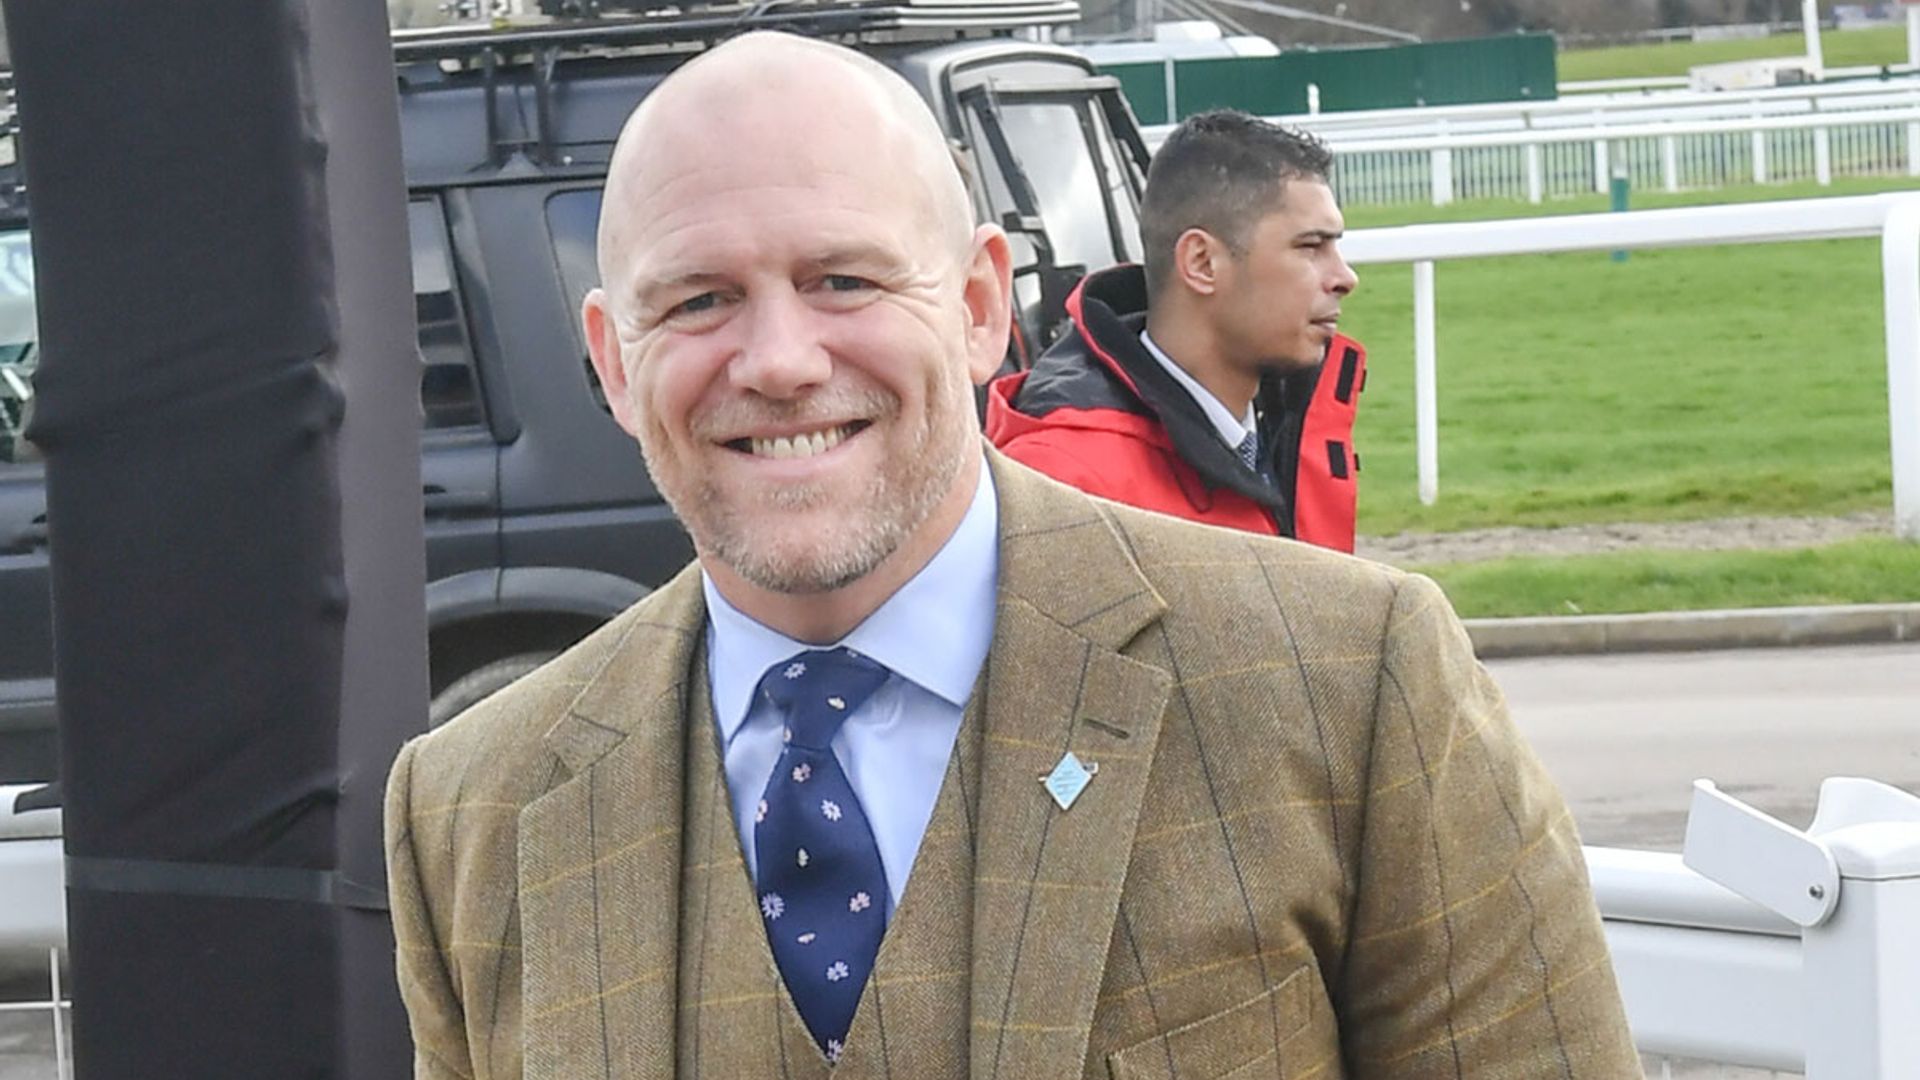 Mike Tindall enjoys 'good times with great friends' during ski trip